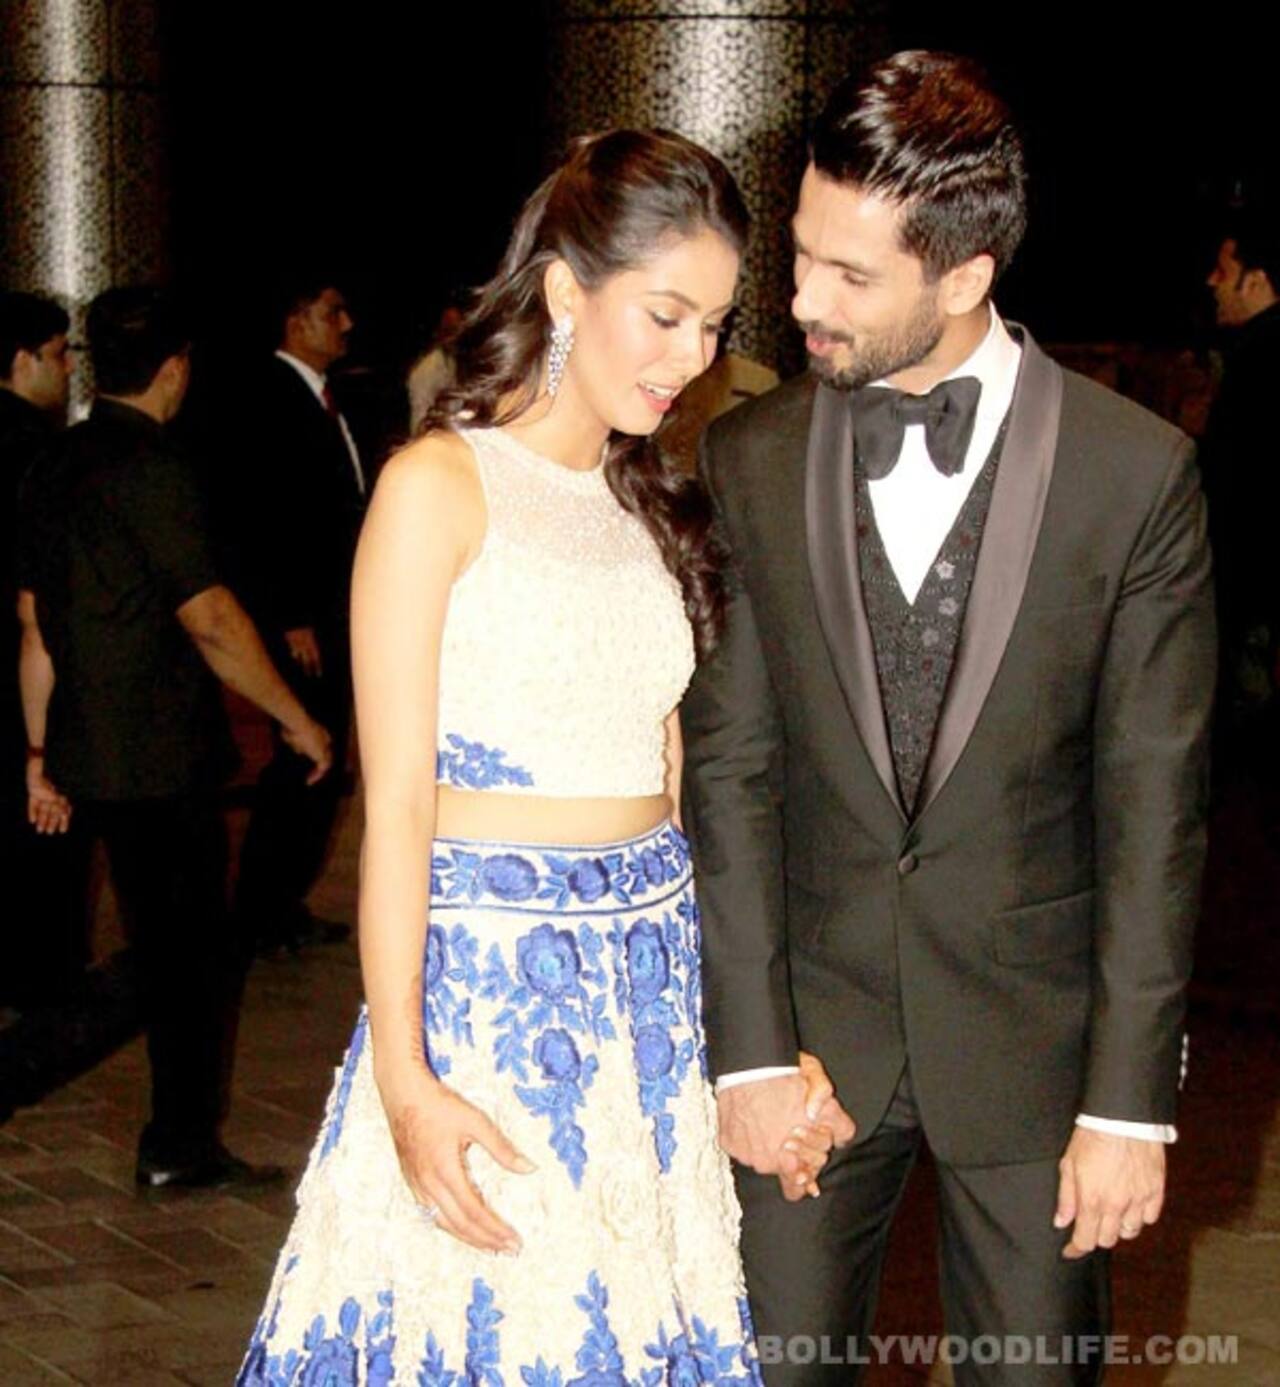 Here's what Shahid Kapoor and Mira Rajput were up to post their wedding reception...